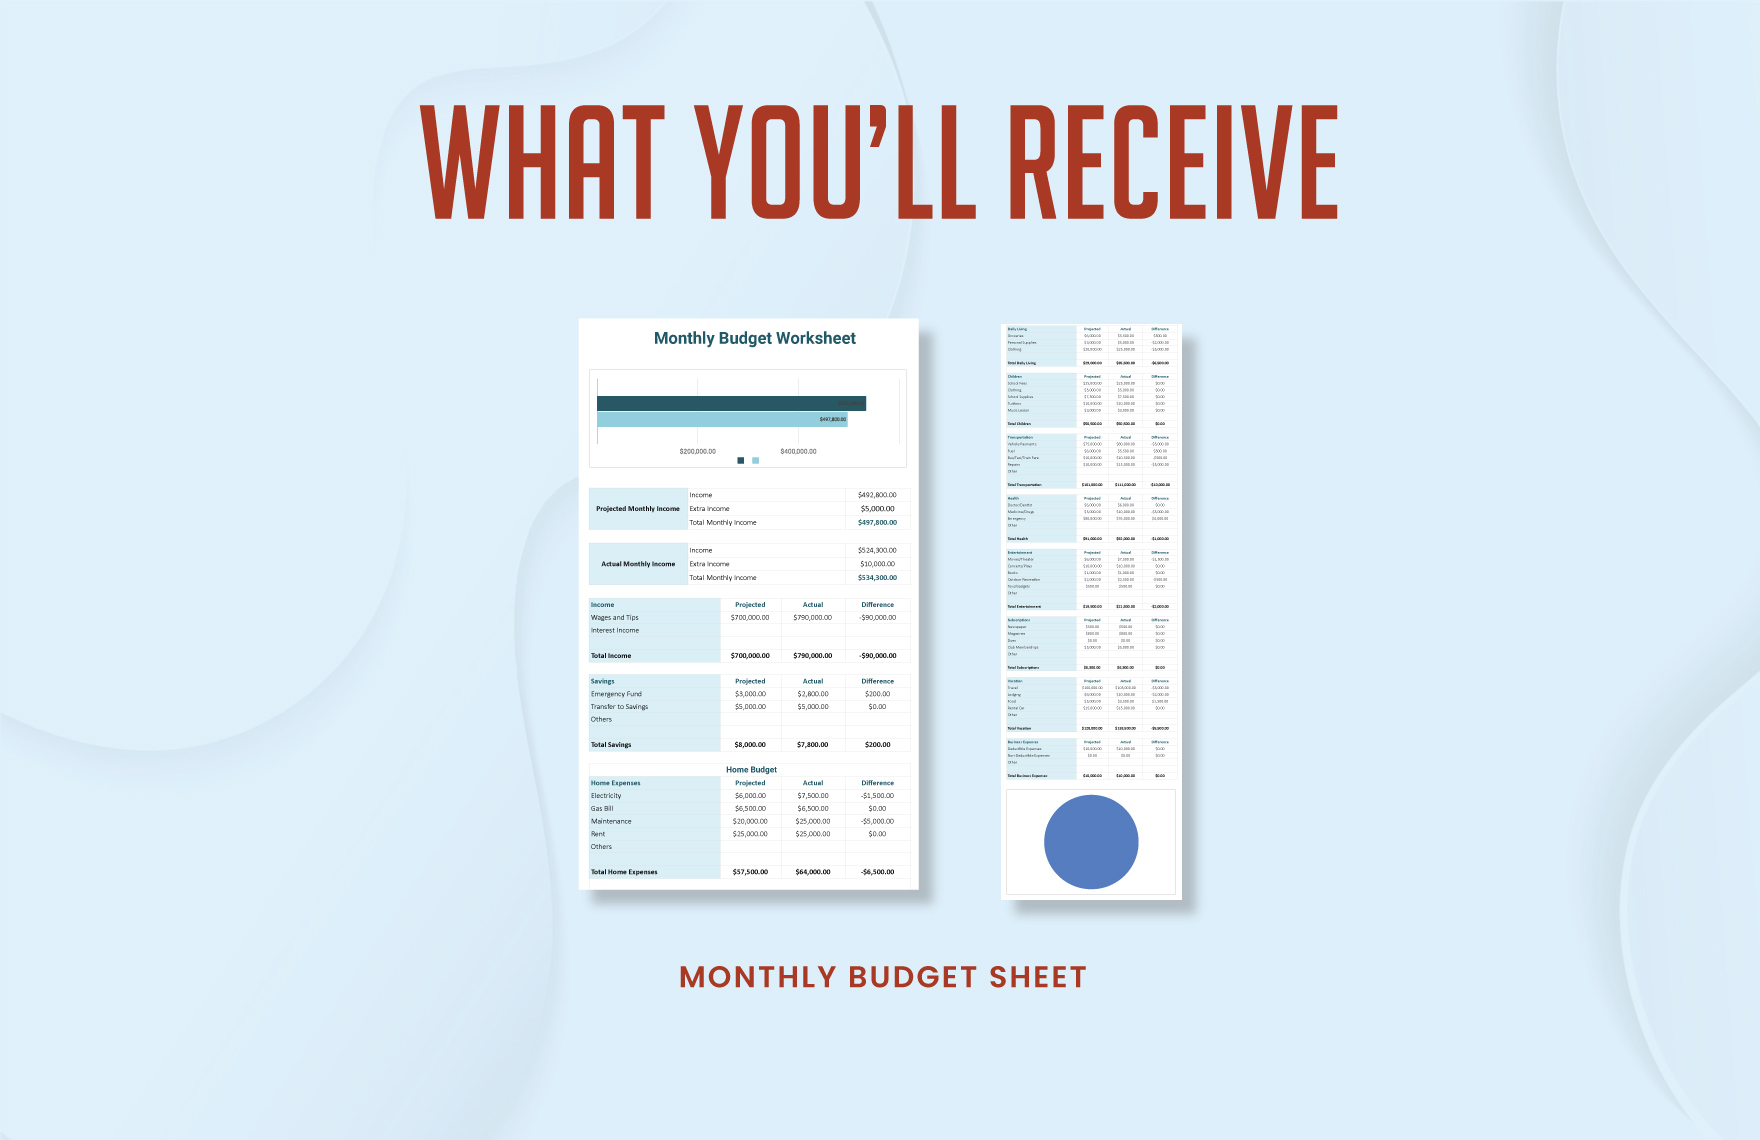 Monthly Budget Sheet Template